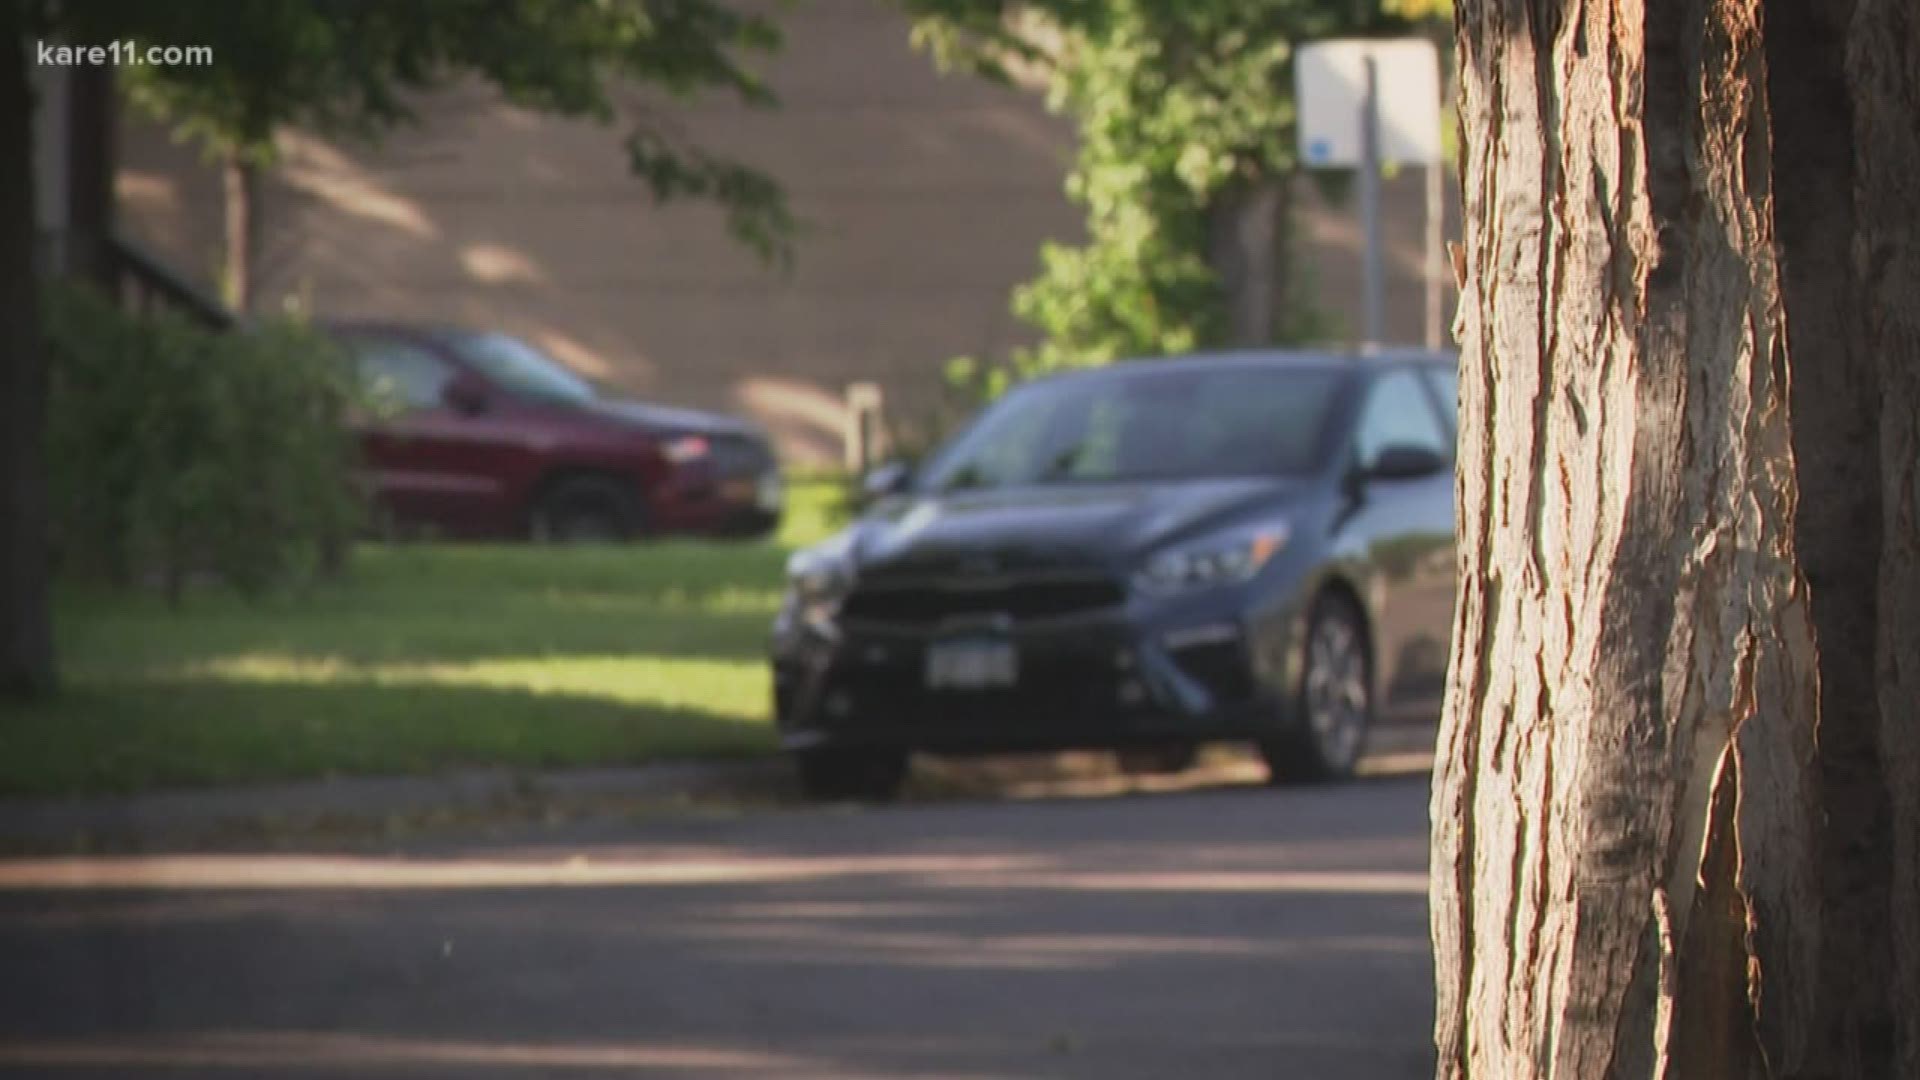 Police in St. Paul have their hands full. Not only are they trying to solve the city's 20th homicide, they are now trying to find suspects in a violent attack.